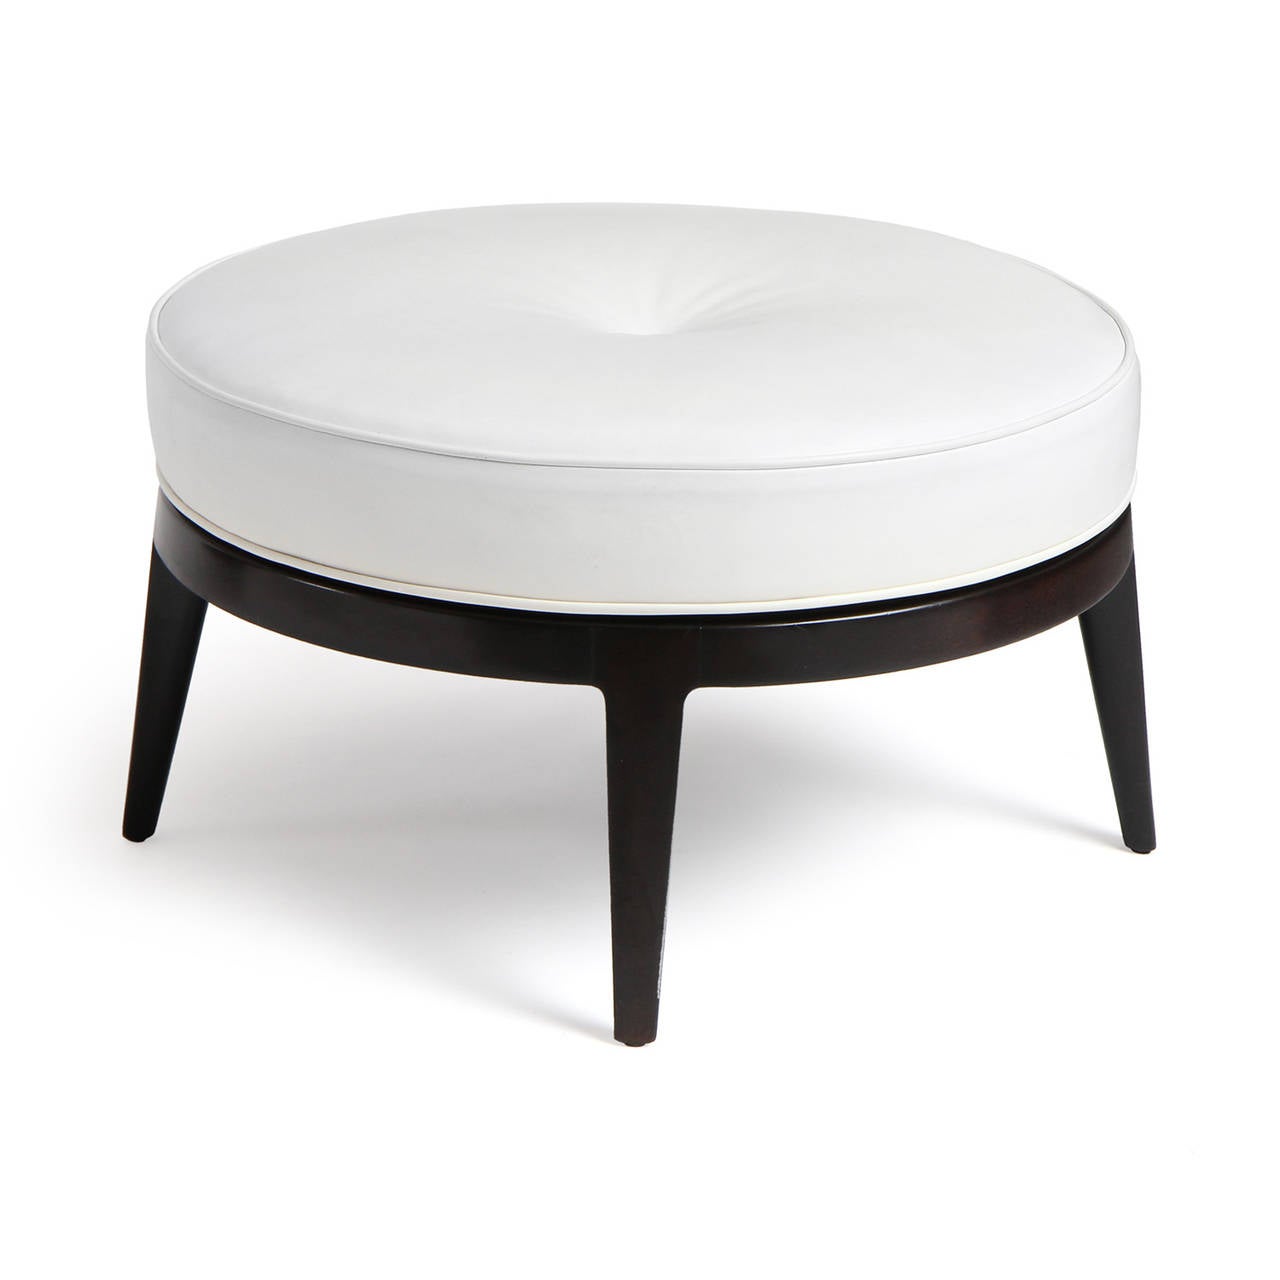 An uncommon and elegant circular swivel-seat ottoman finely upholstered in leather on a lacquered base with splayed and tapered legs.